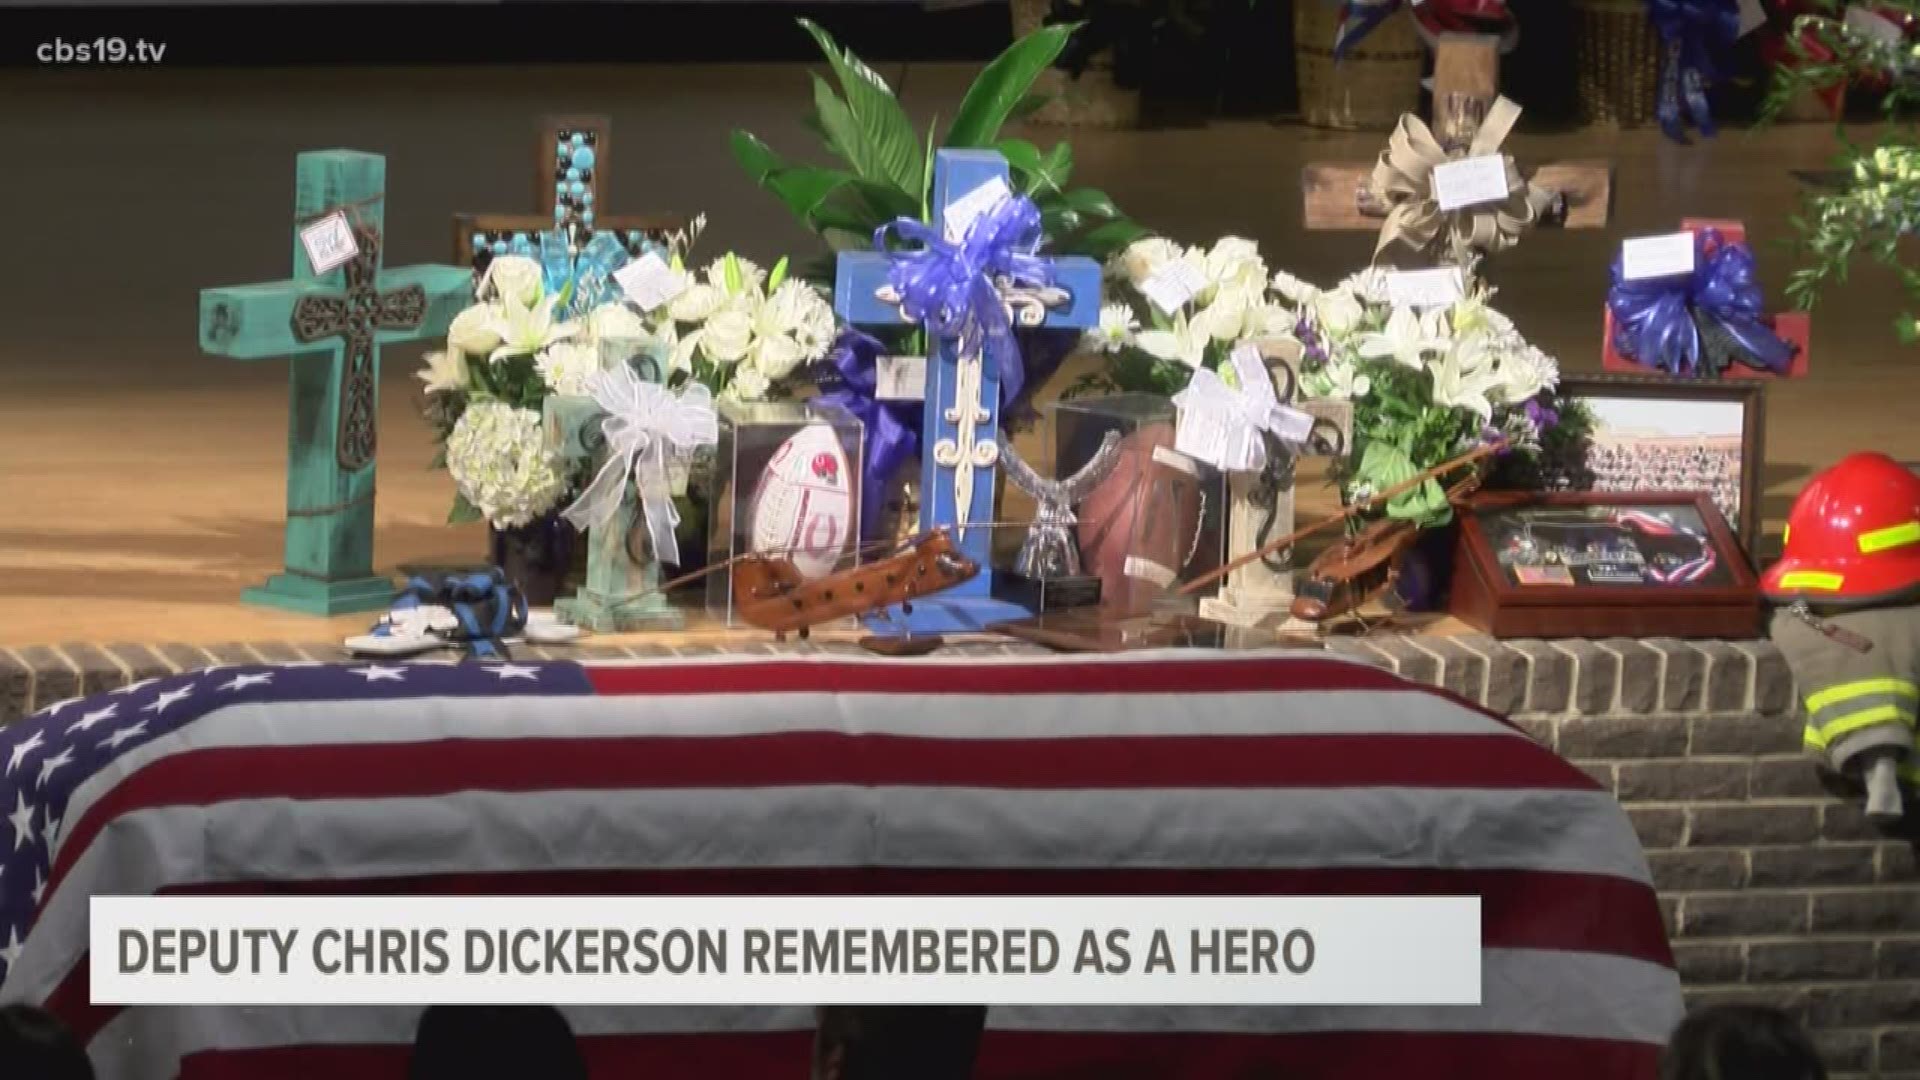 Hundreds of people gathered inside the Carthage Civic Center Saturday afternoon to pay tribute to the life of Panola County Sheriff Deputy Chris Dickerson.